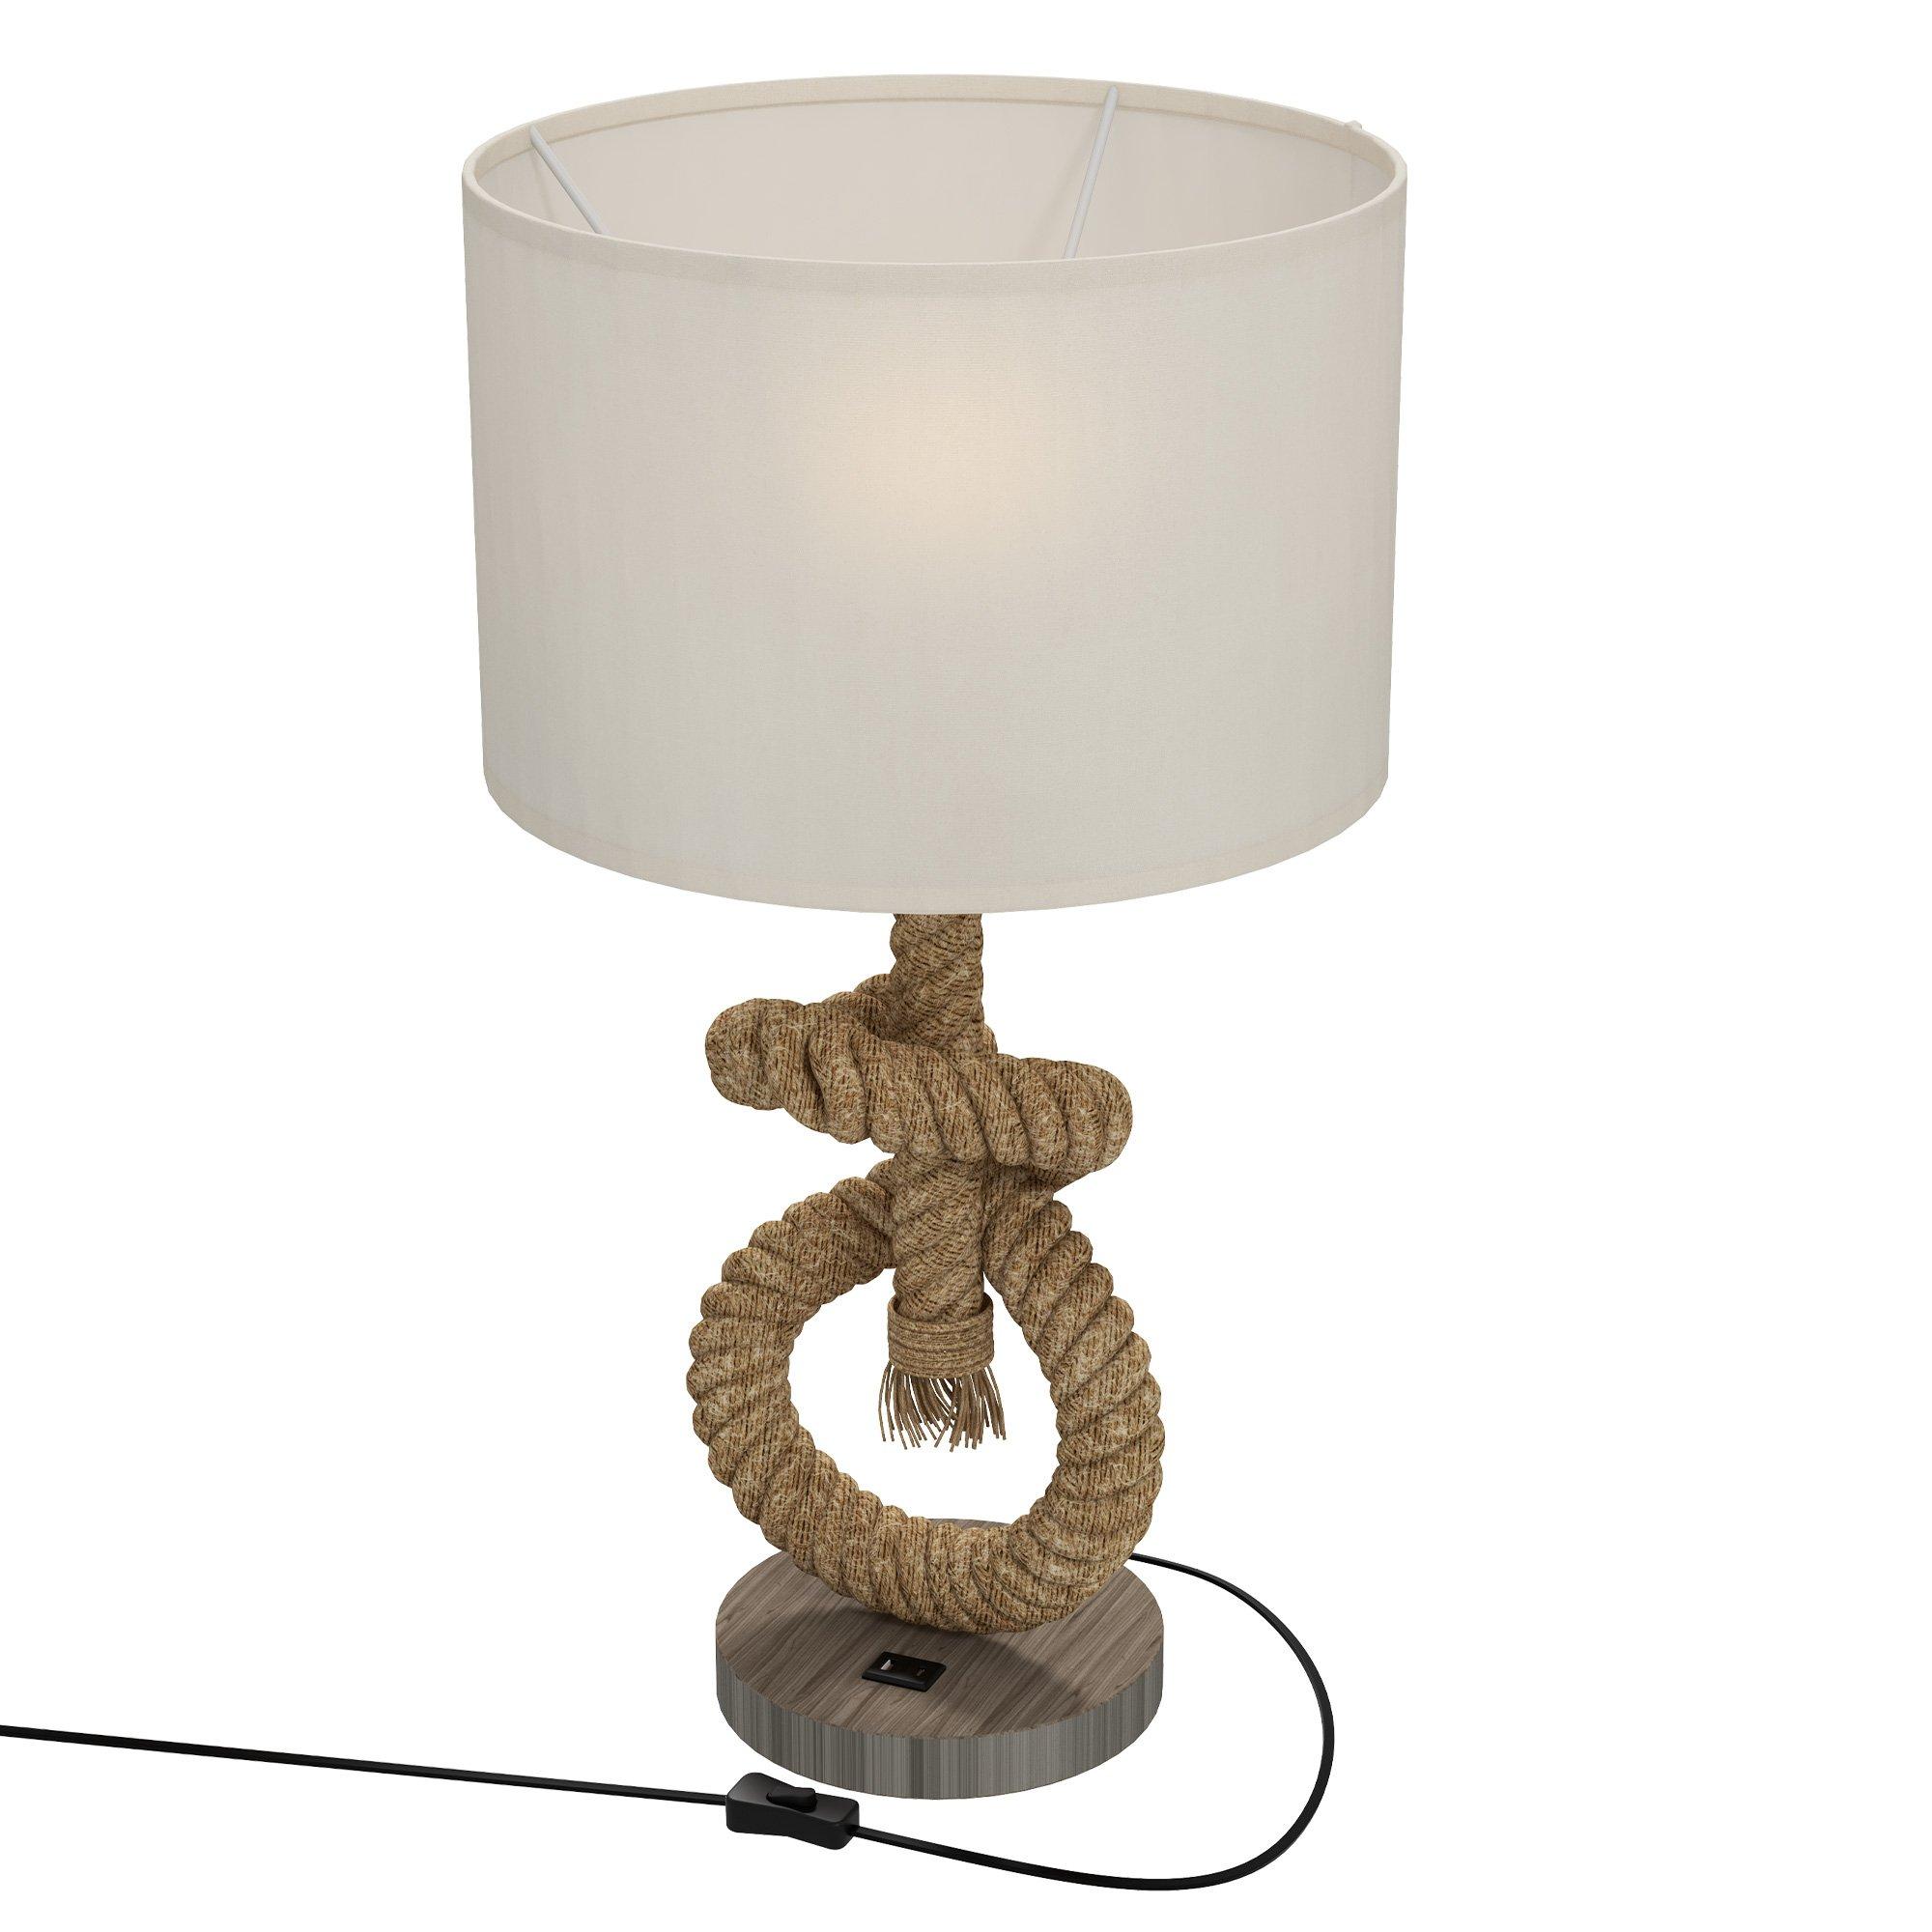 Nautical Table Lamp with USB Port LED Bedside Lamp for Bedroom